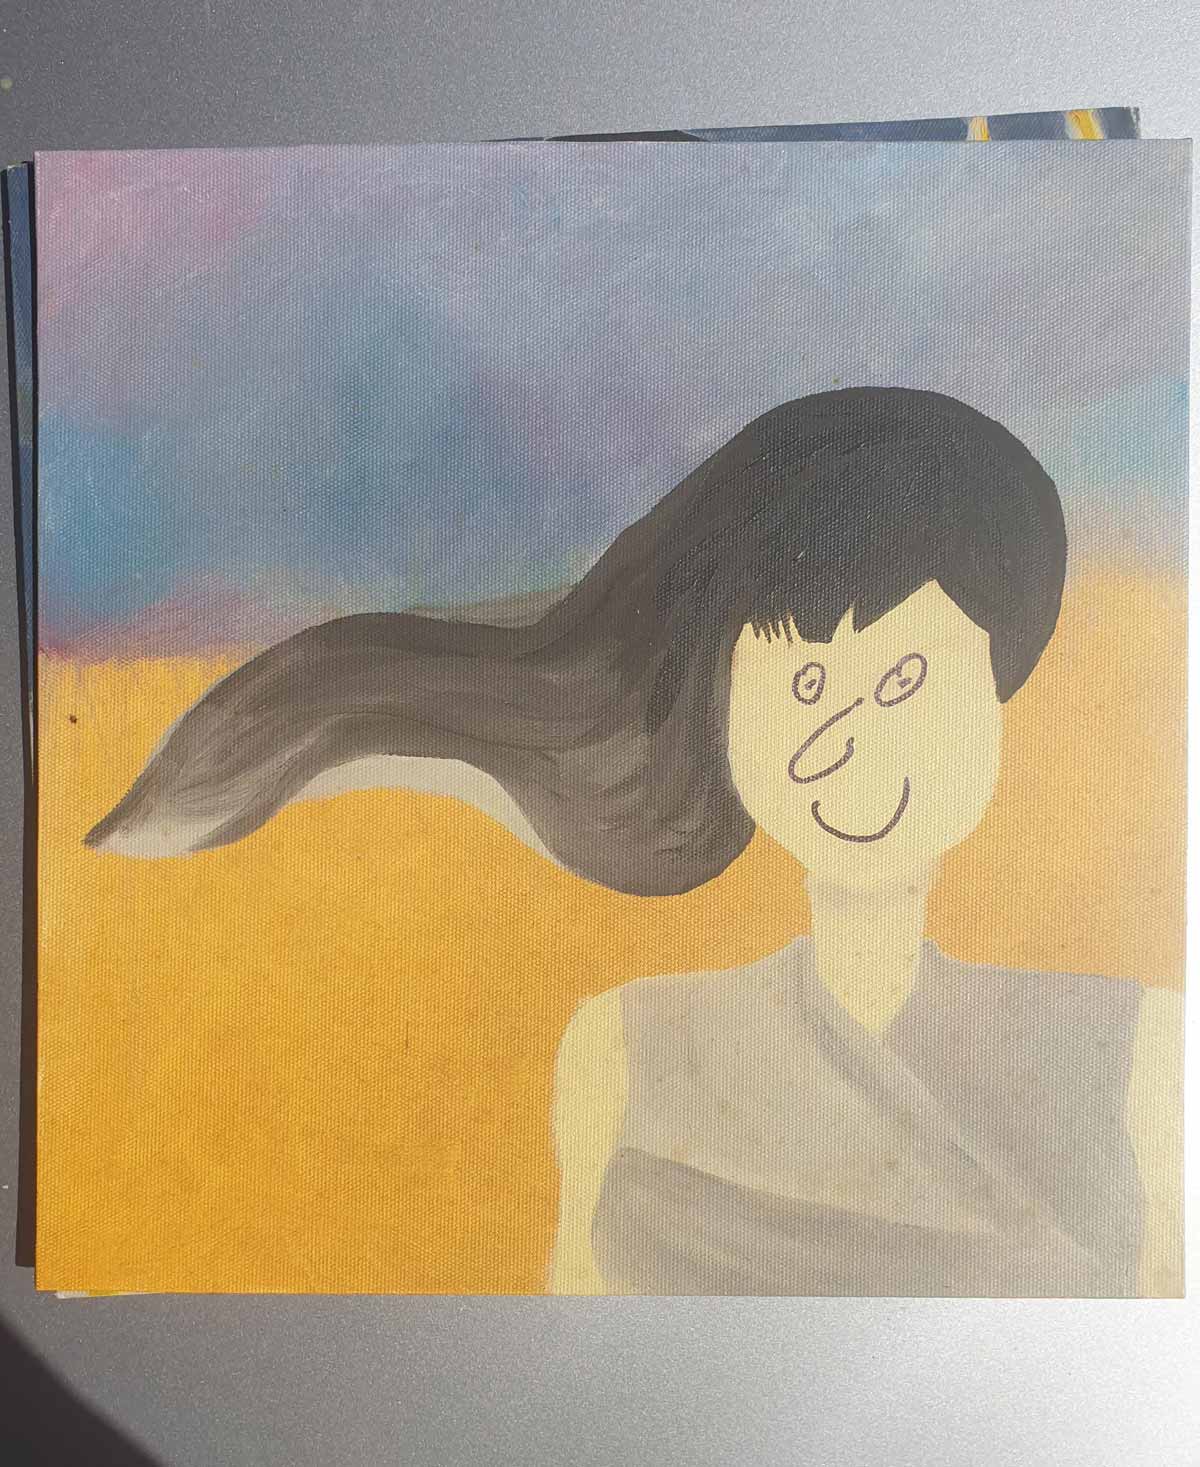 I started painting during lockdown